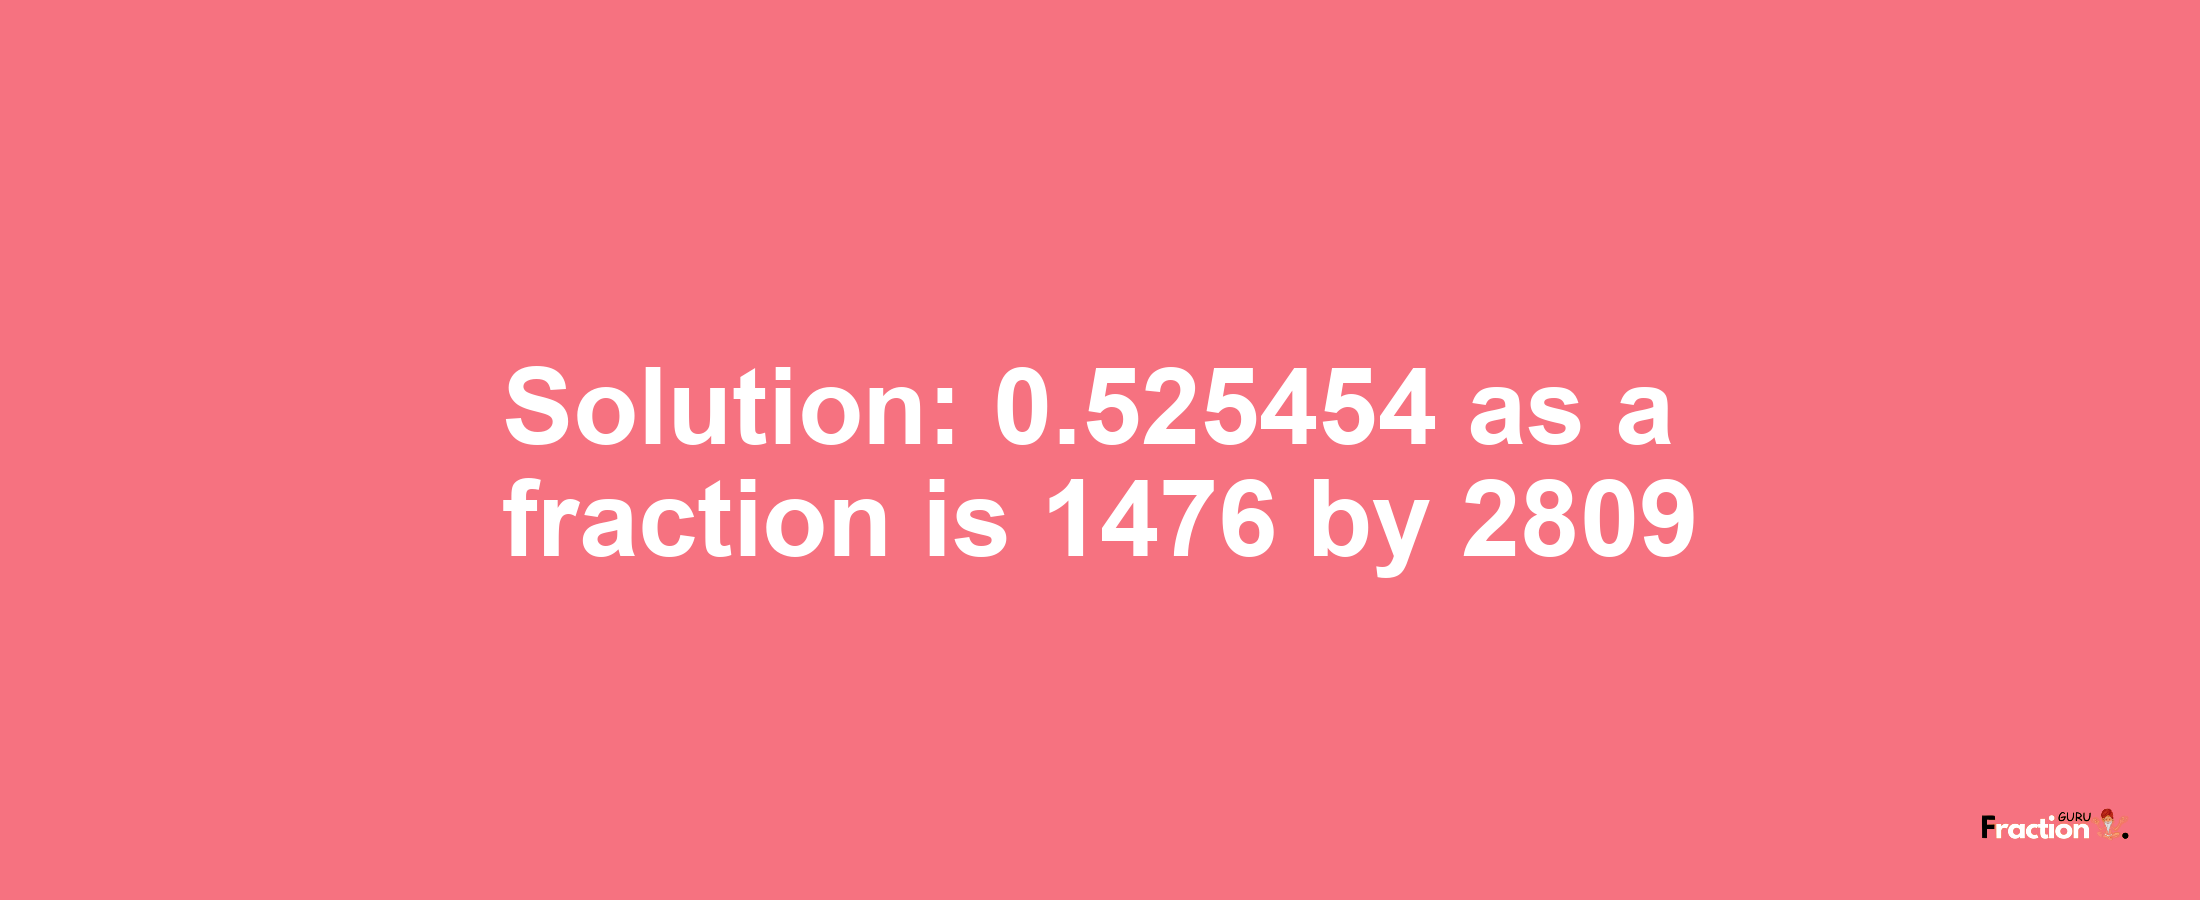 Solution:0.525454 as a fraction is 1476/2809